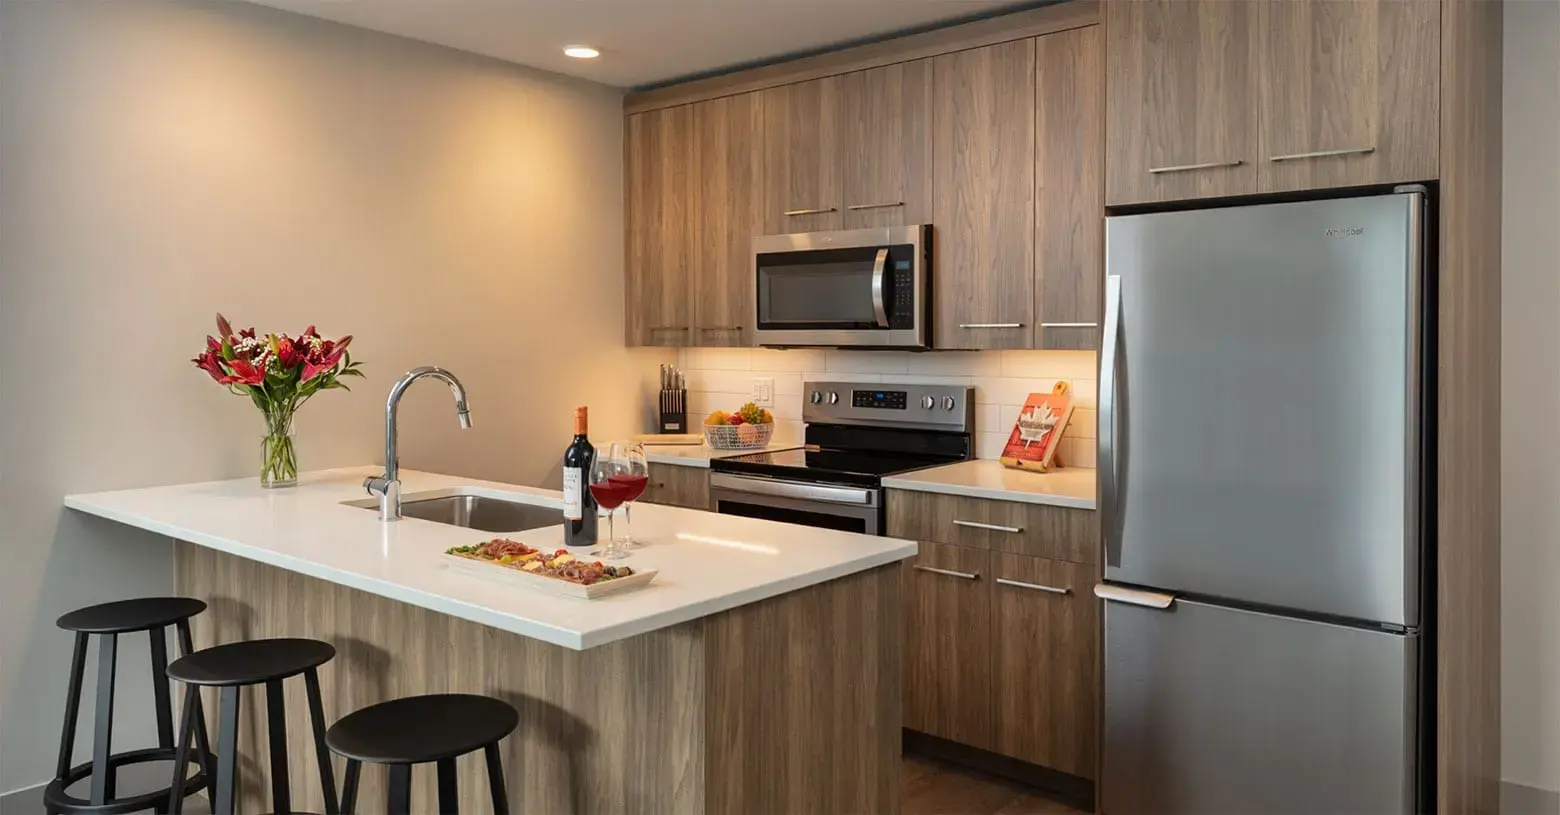 A kitchenette with stainless steel appliances at the Shore Kelowna; on the island countertop are two glasses of wine and a charcuterie board. 